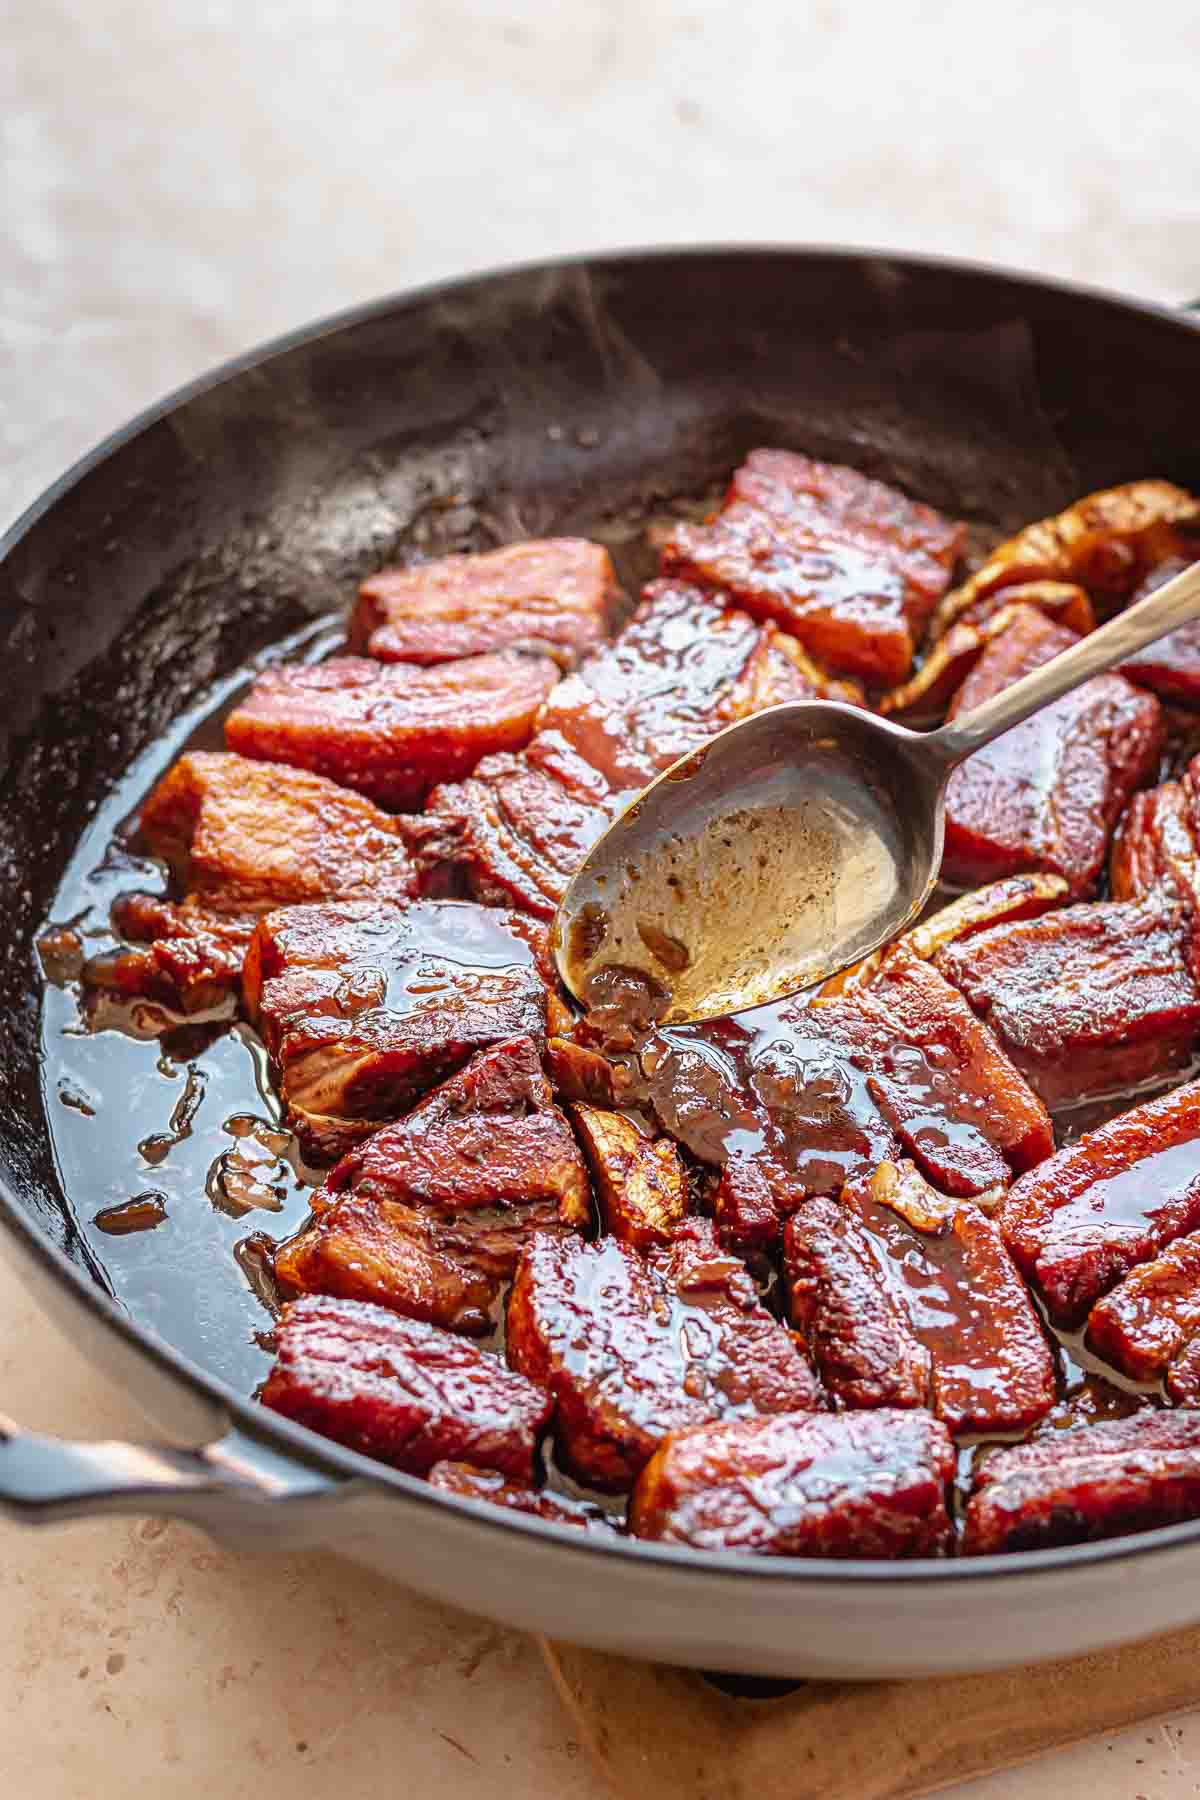 A spoon pours braising liquid on top of cooked pork belly.